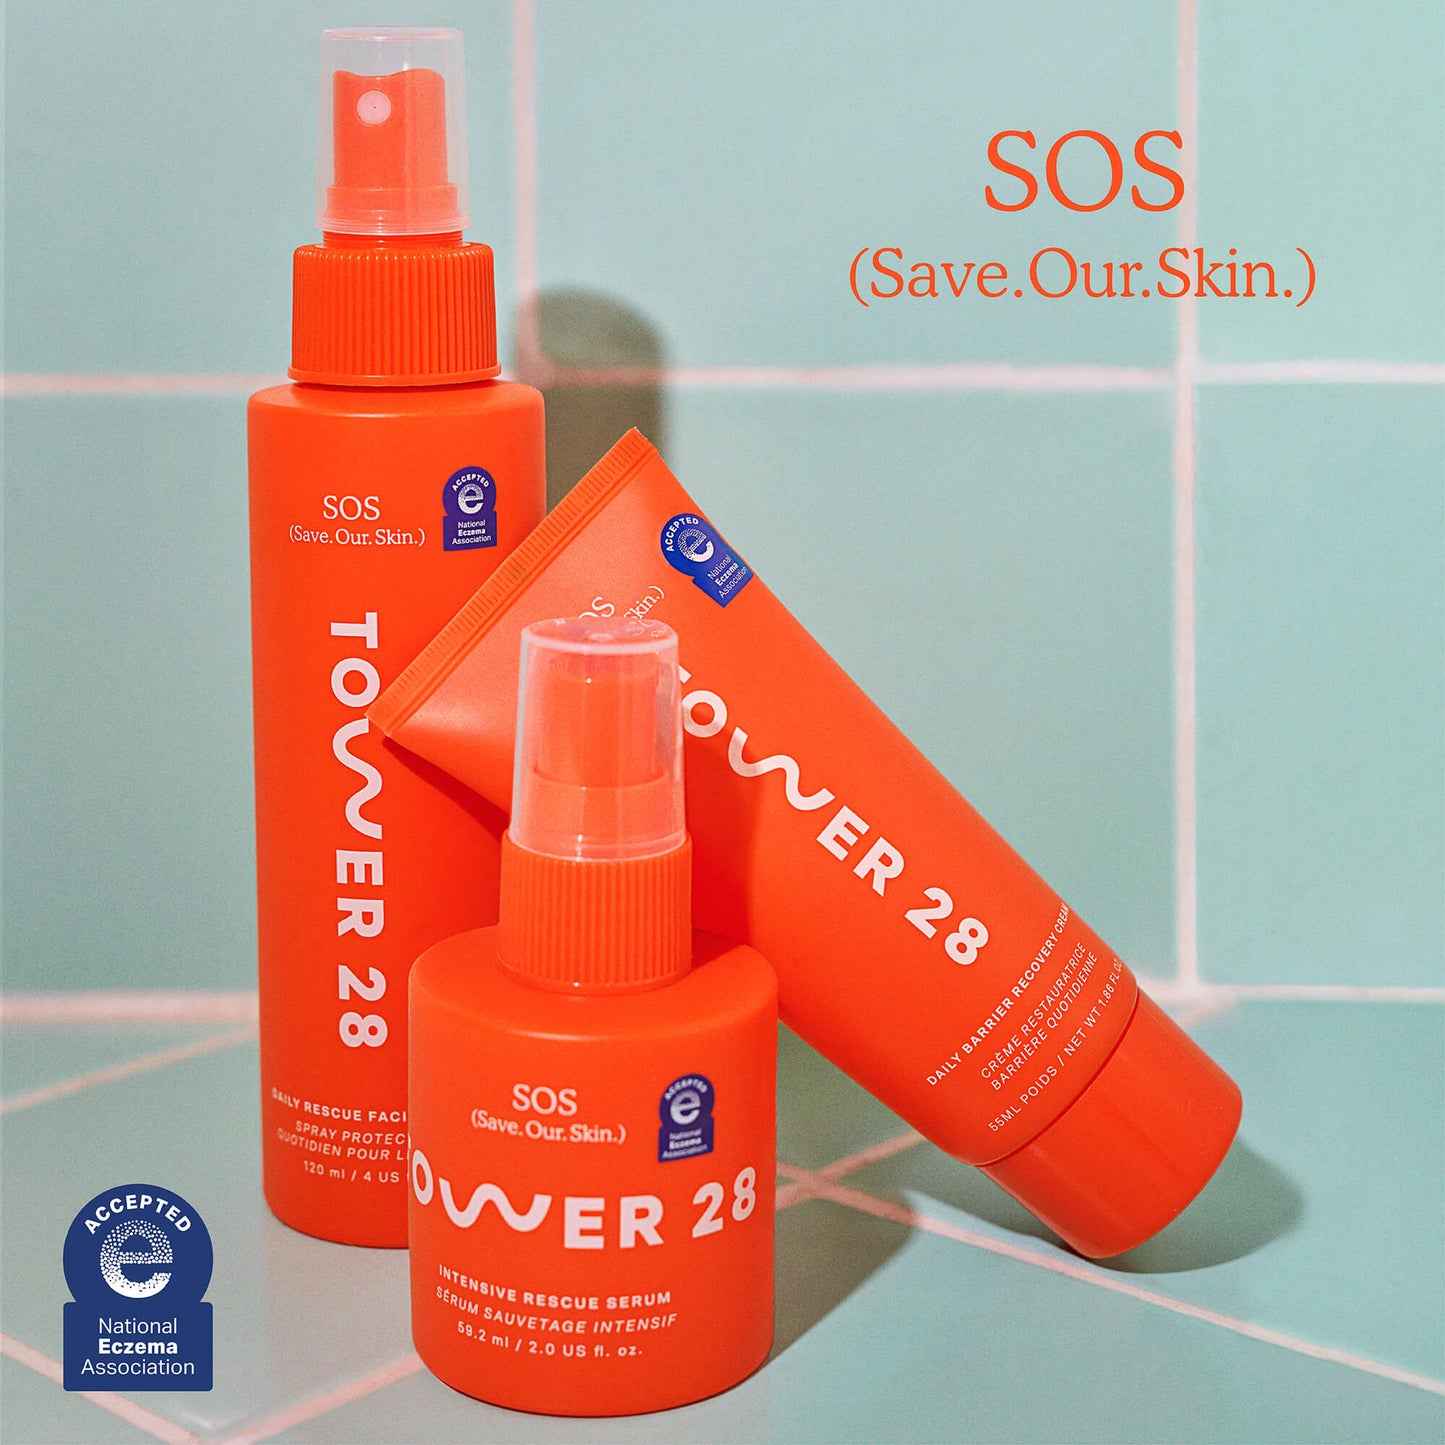 [Shared: Tower 28 Beauty SOS Recovery Cream alongside SOS Rescue Spray and SOS Rescue Serum with the National Eczema Association Seal of Acceptance]